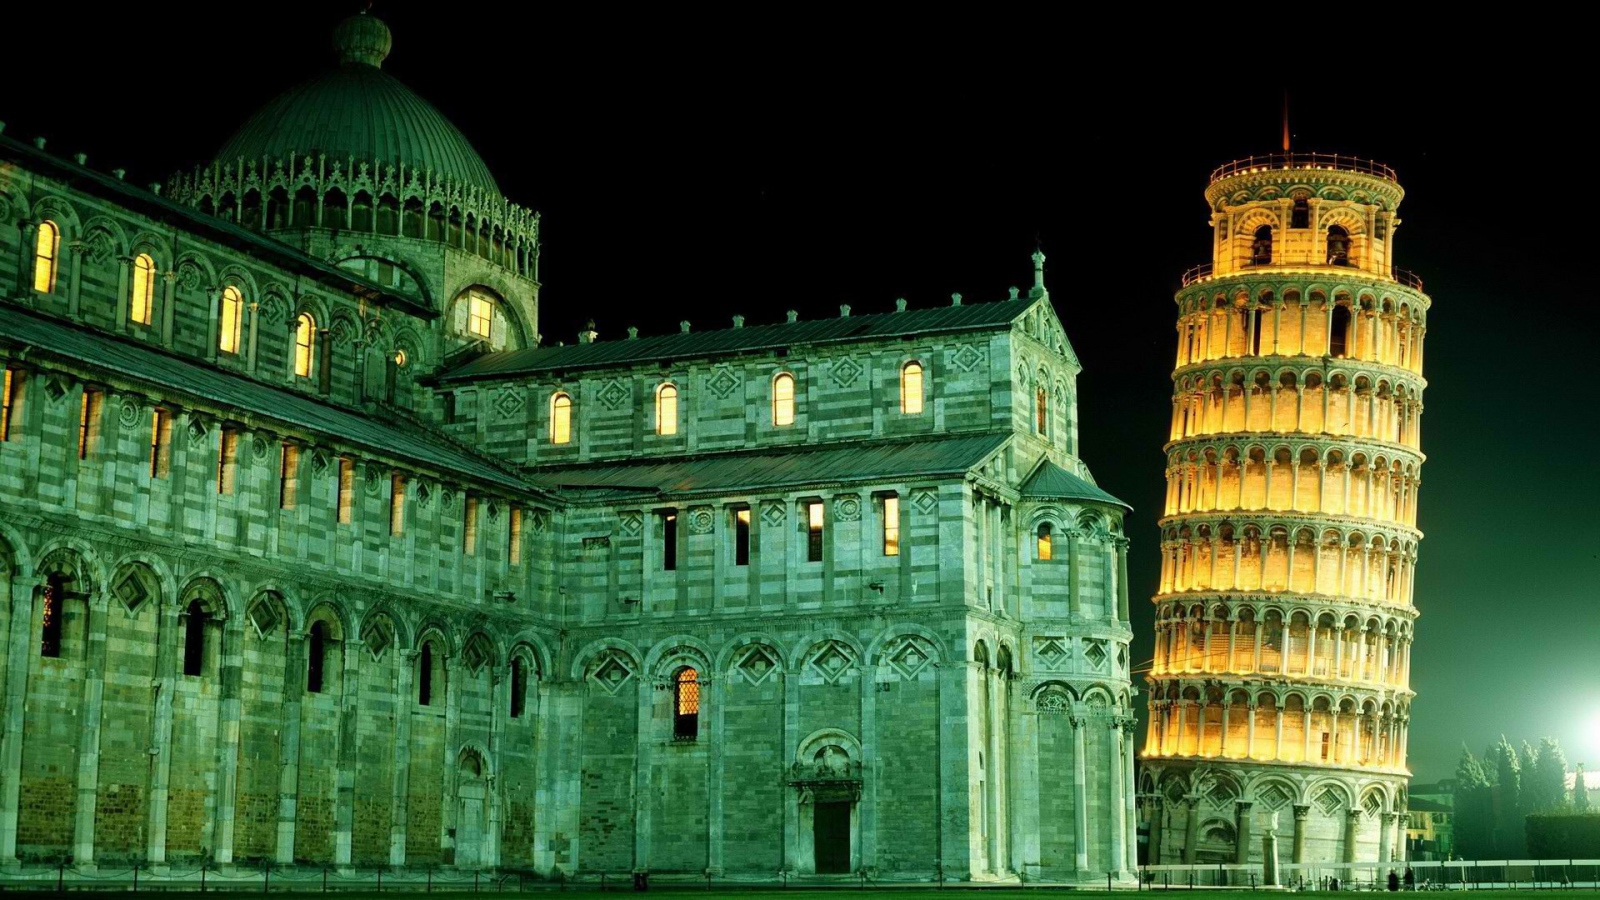 The leaning tower of Pisa Italy